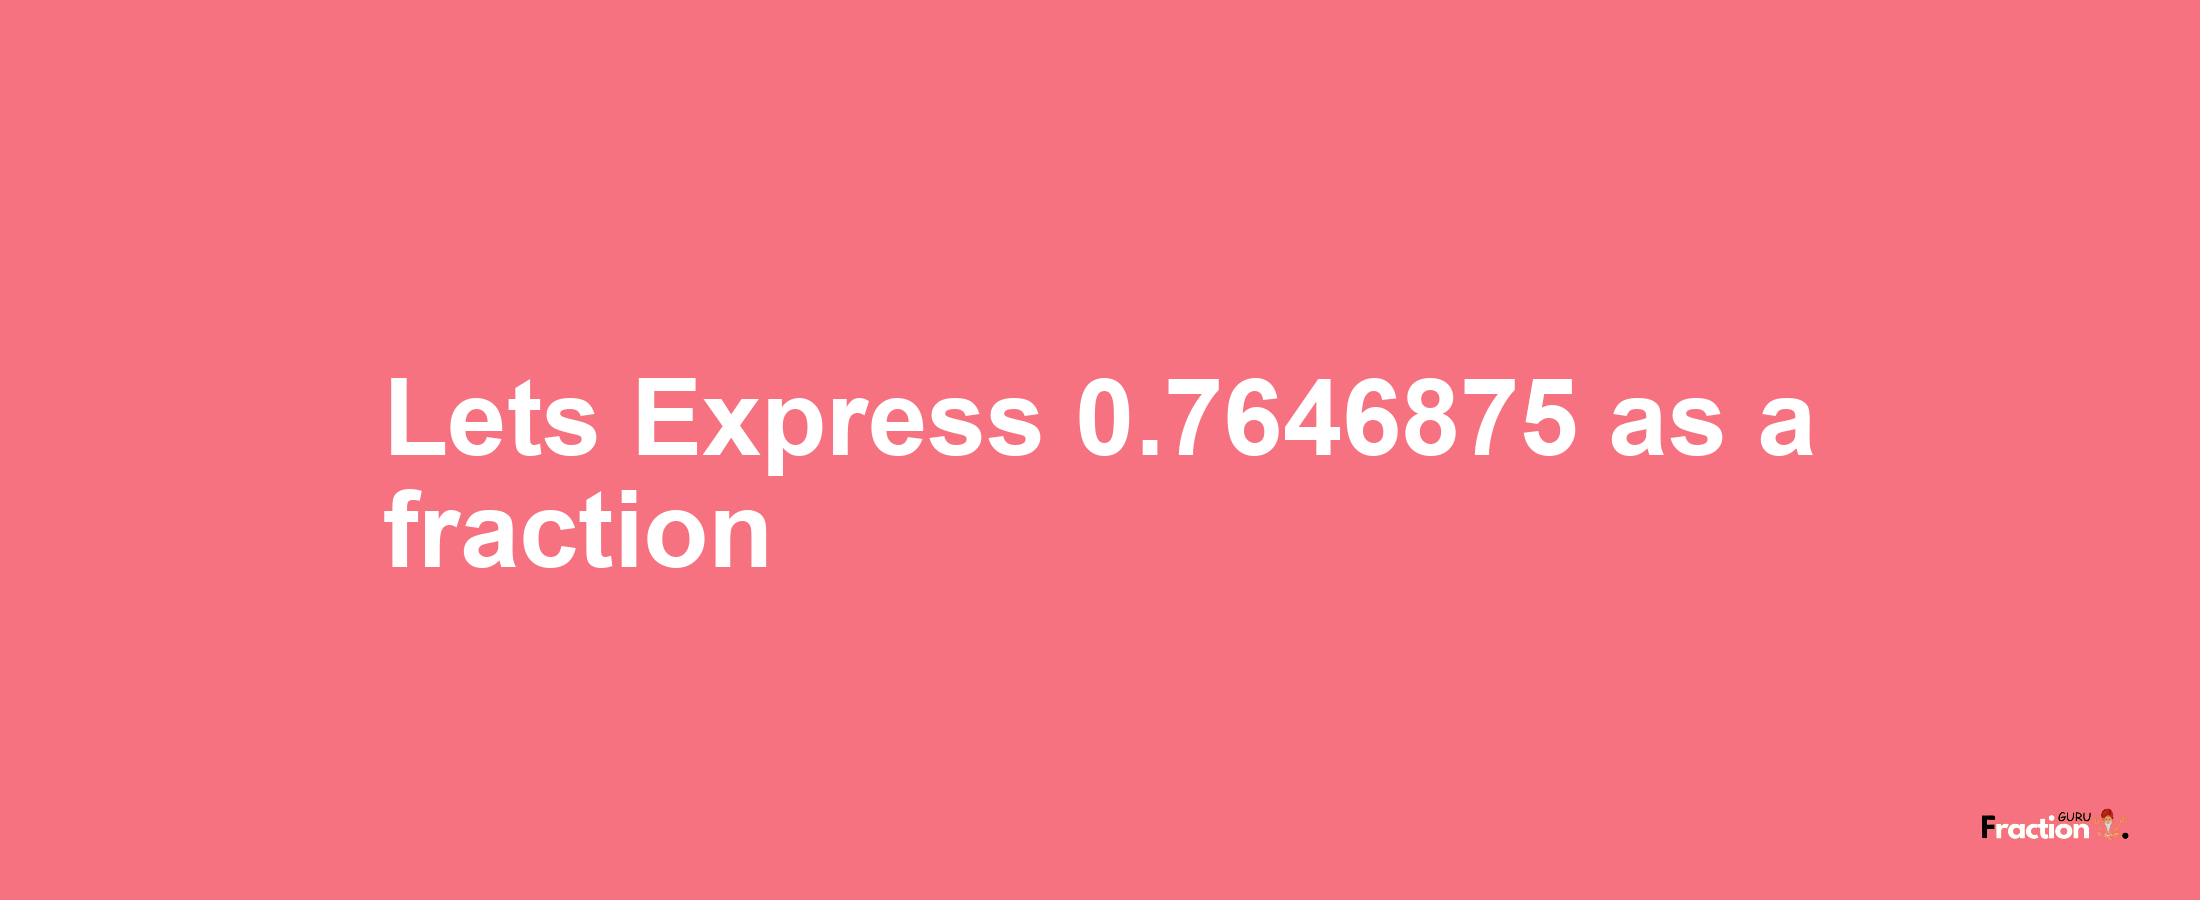 Lets Express 0.7646875 as afraction